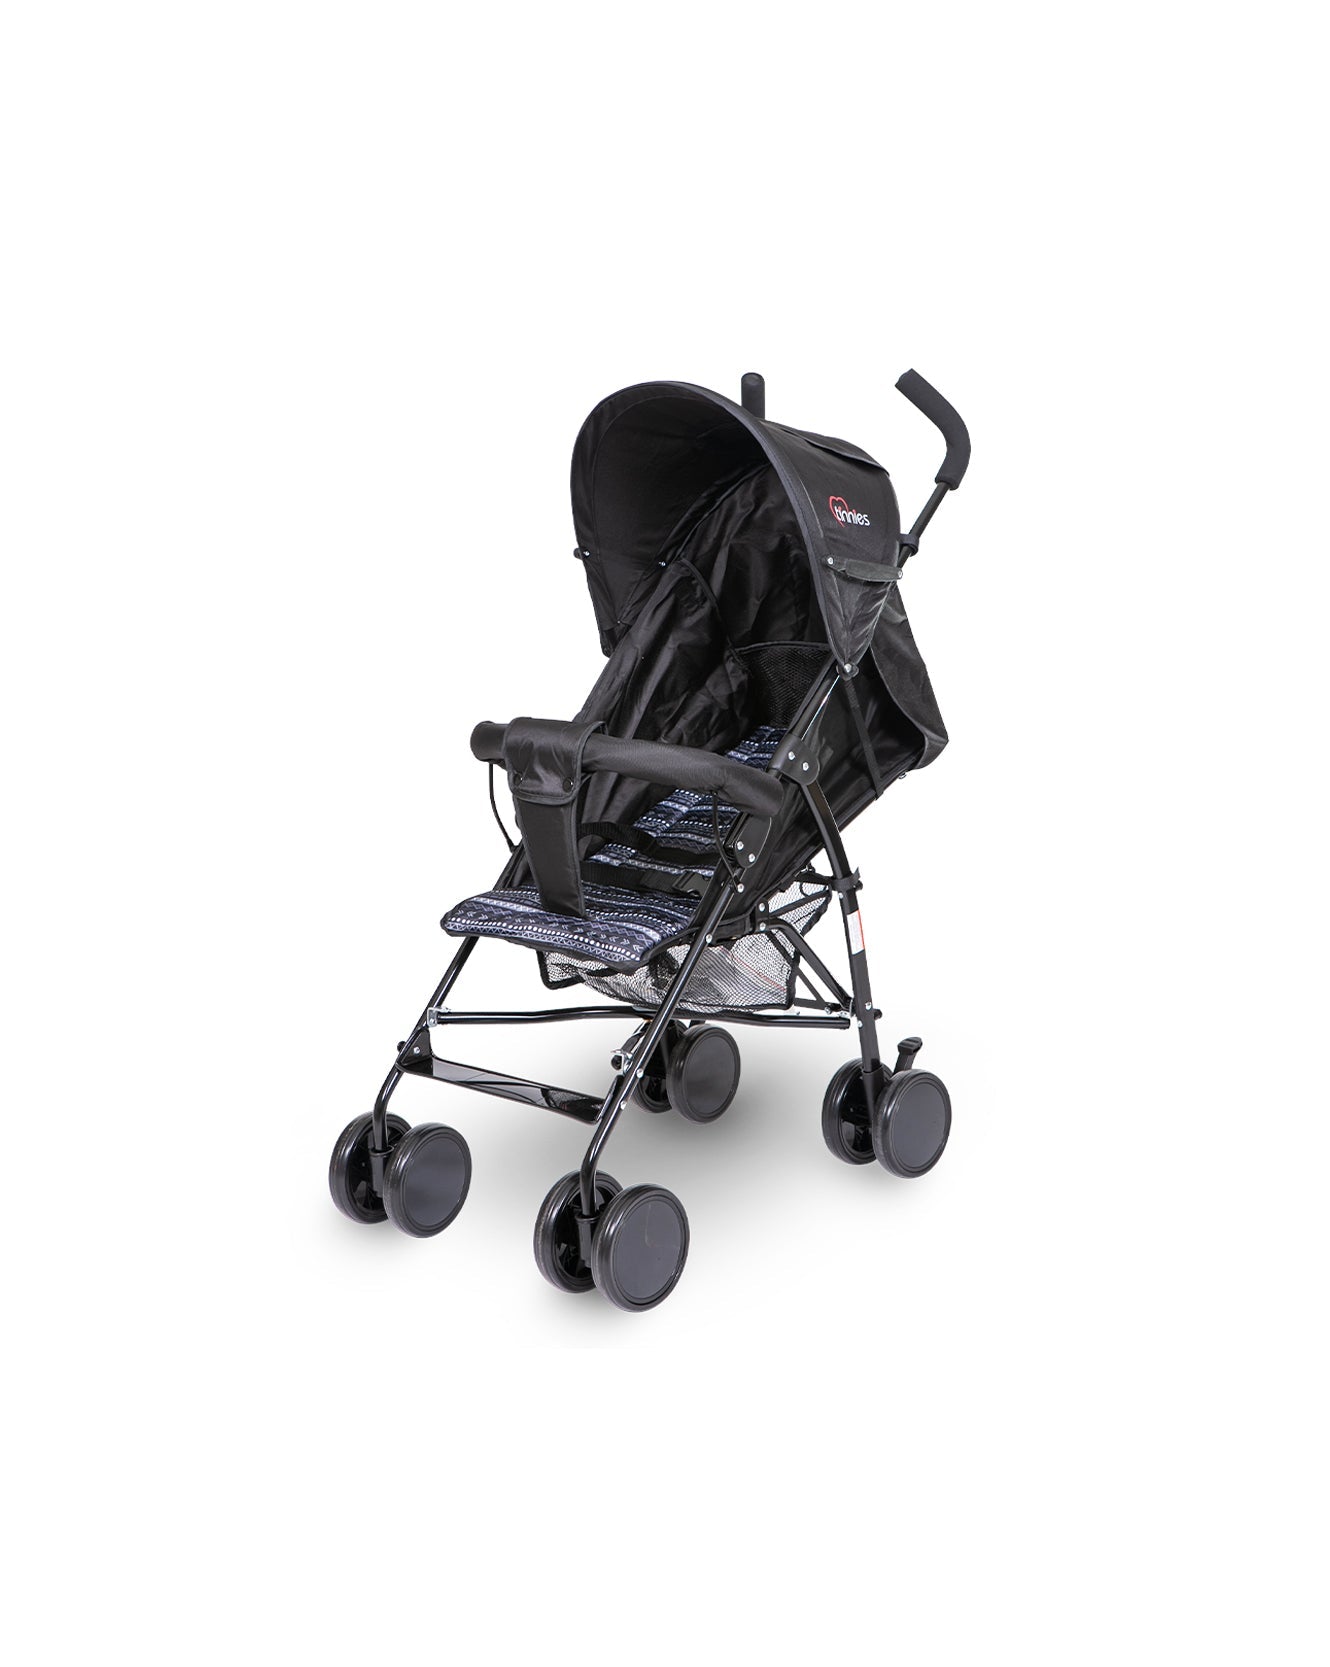 Tinnies Baby Buggy (Multi Color)